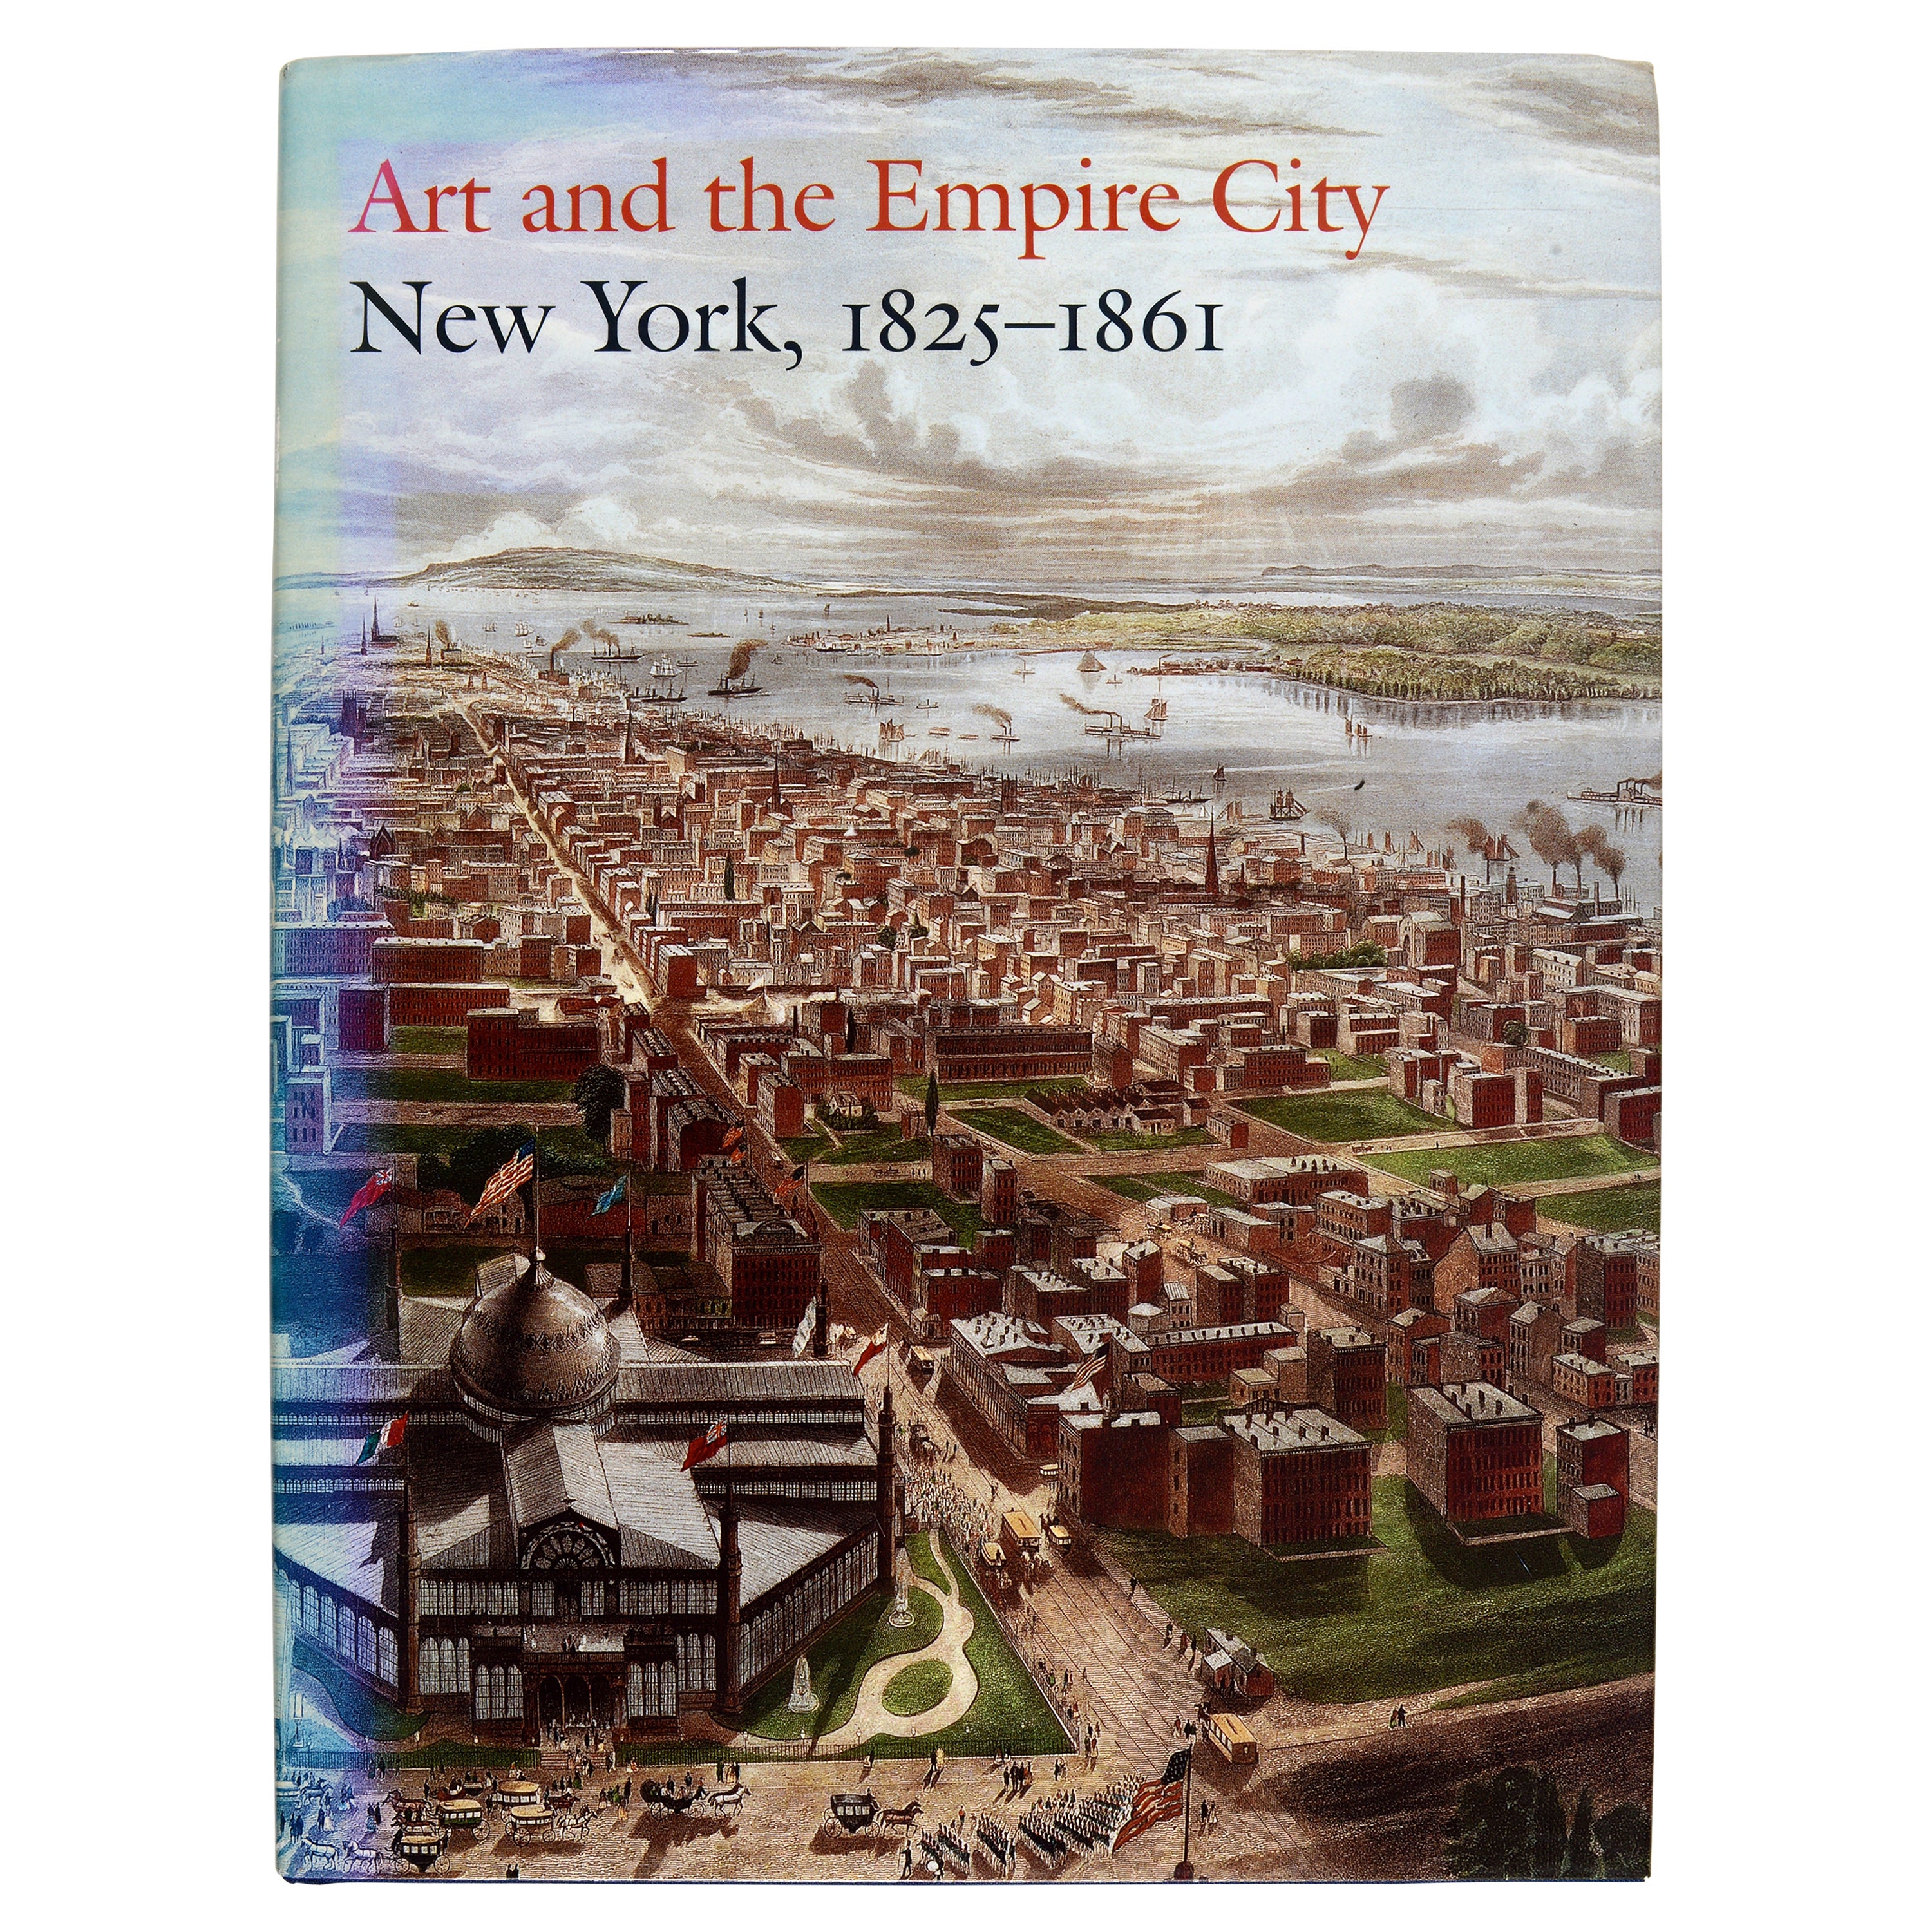 Art and the Empire City New York, 1825-1861, by Dell Upton, 1st Ed For Sale